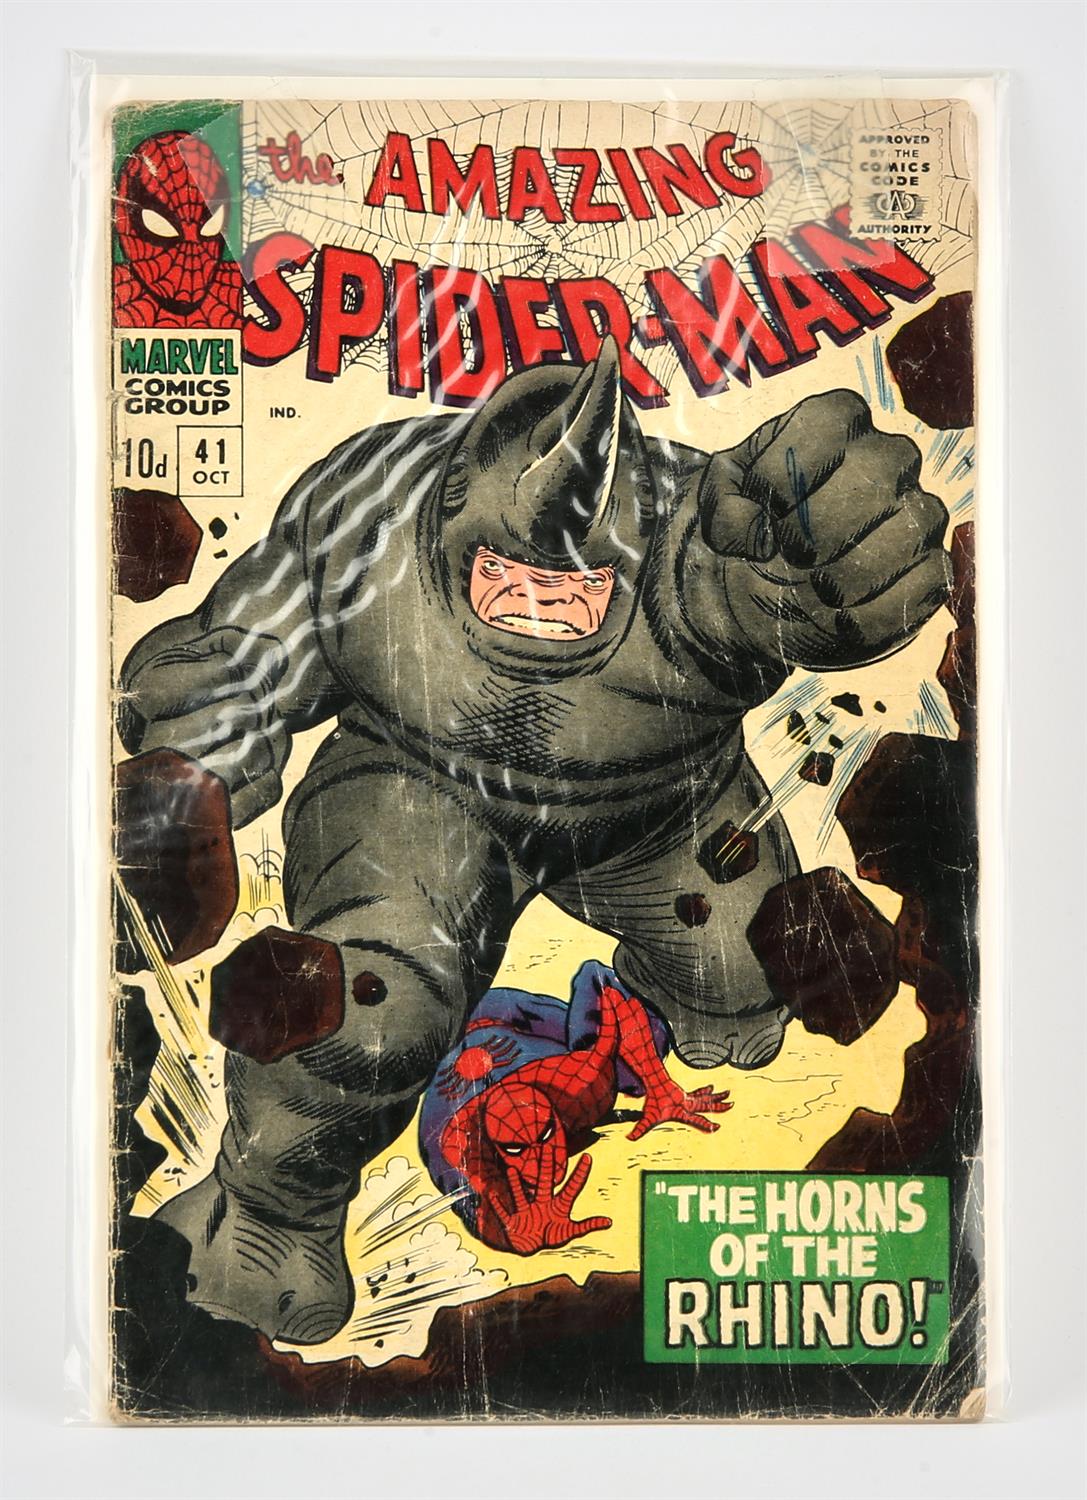 Marvel Comics: The Amazing Spider-Man No. 41 (1966). Featuring the 1st appearance of the Rhino.